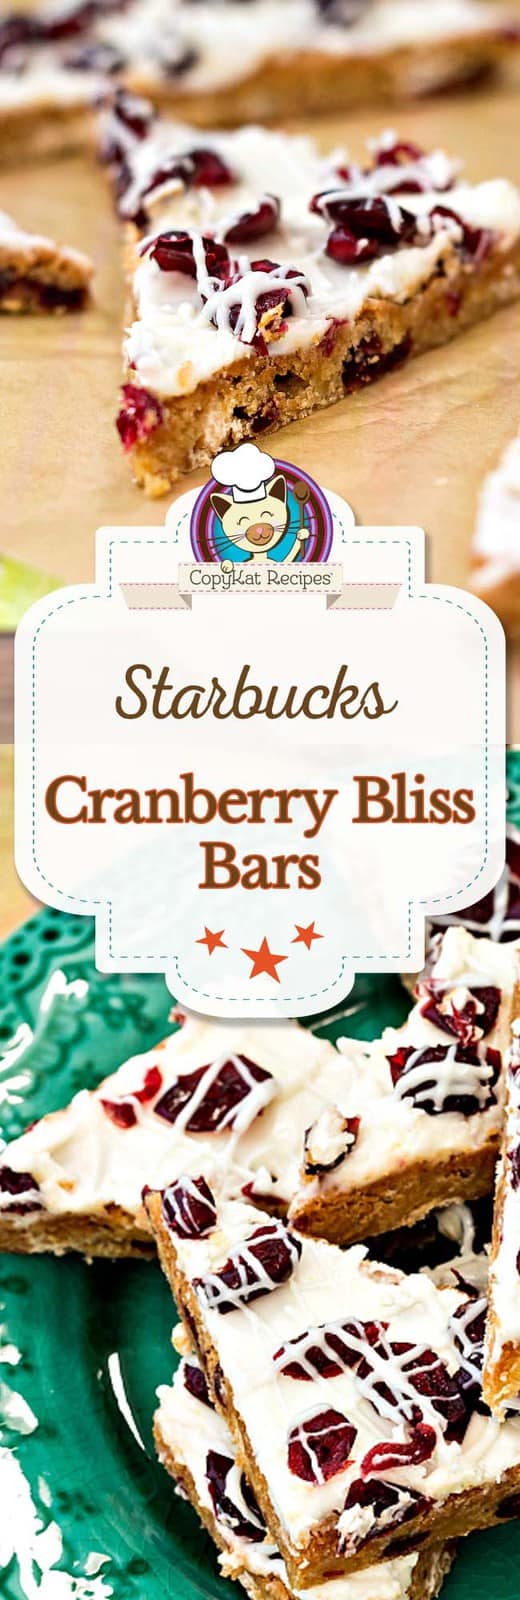 Make your own Starbucks Cranberry Bliss Bar at home with this easy copycat recipe. 